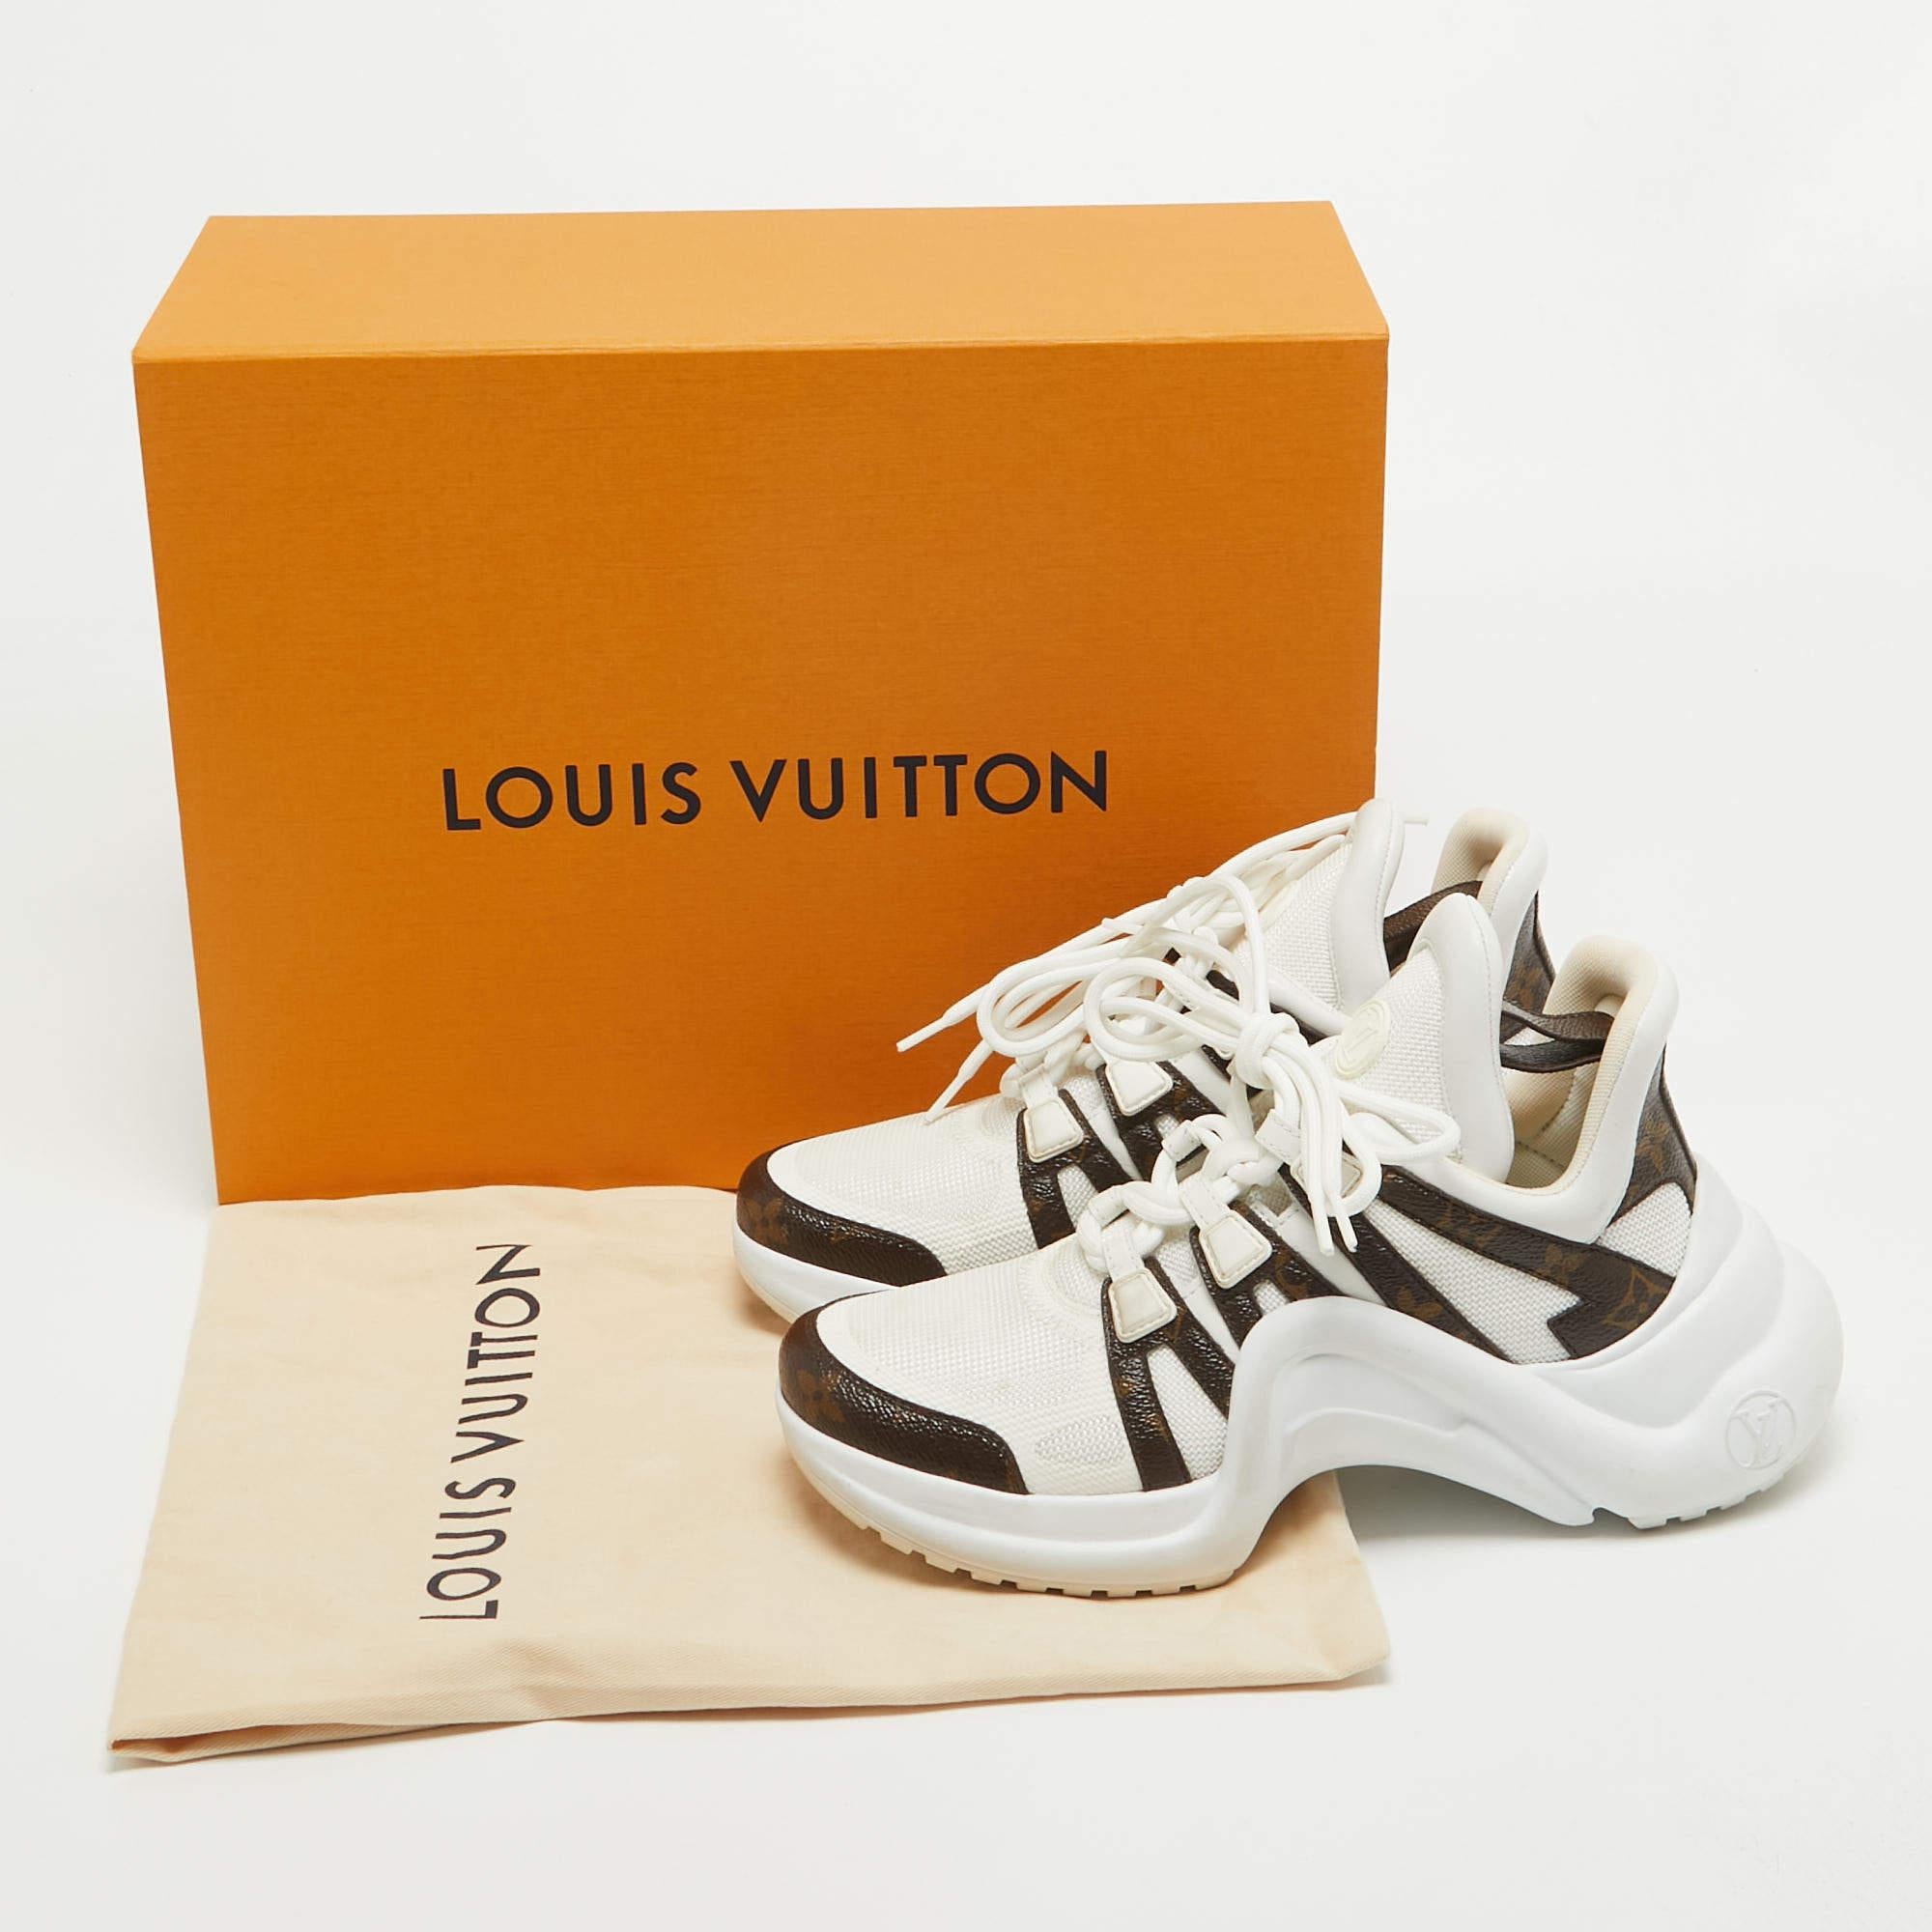 Louis Vuitton White Mesh and Monogram Canvas Archlight Sneakers Size 37.5 4